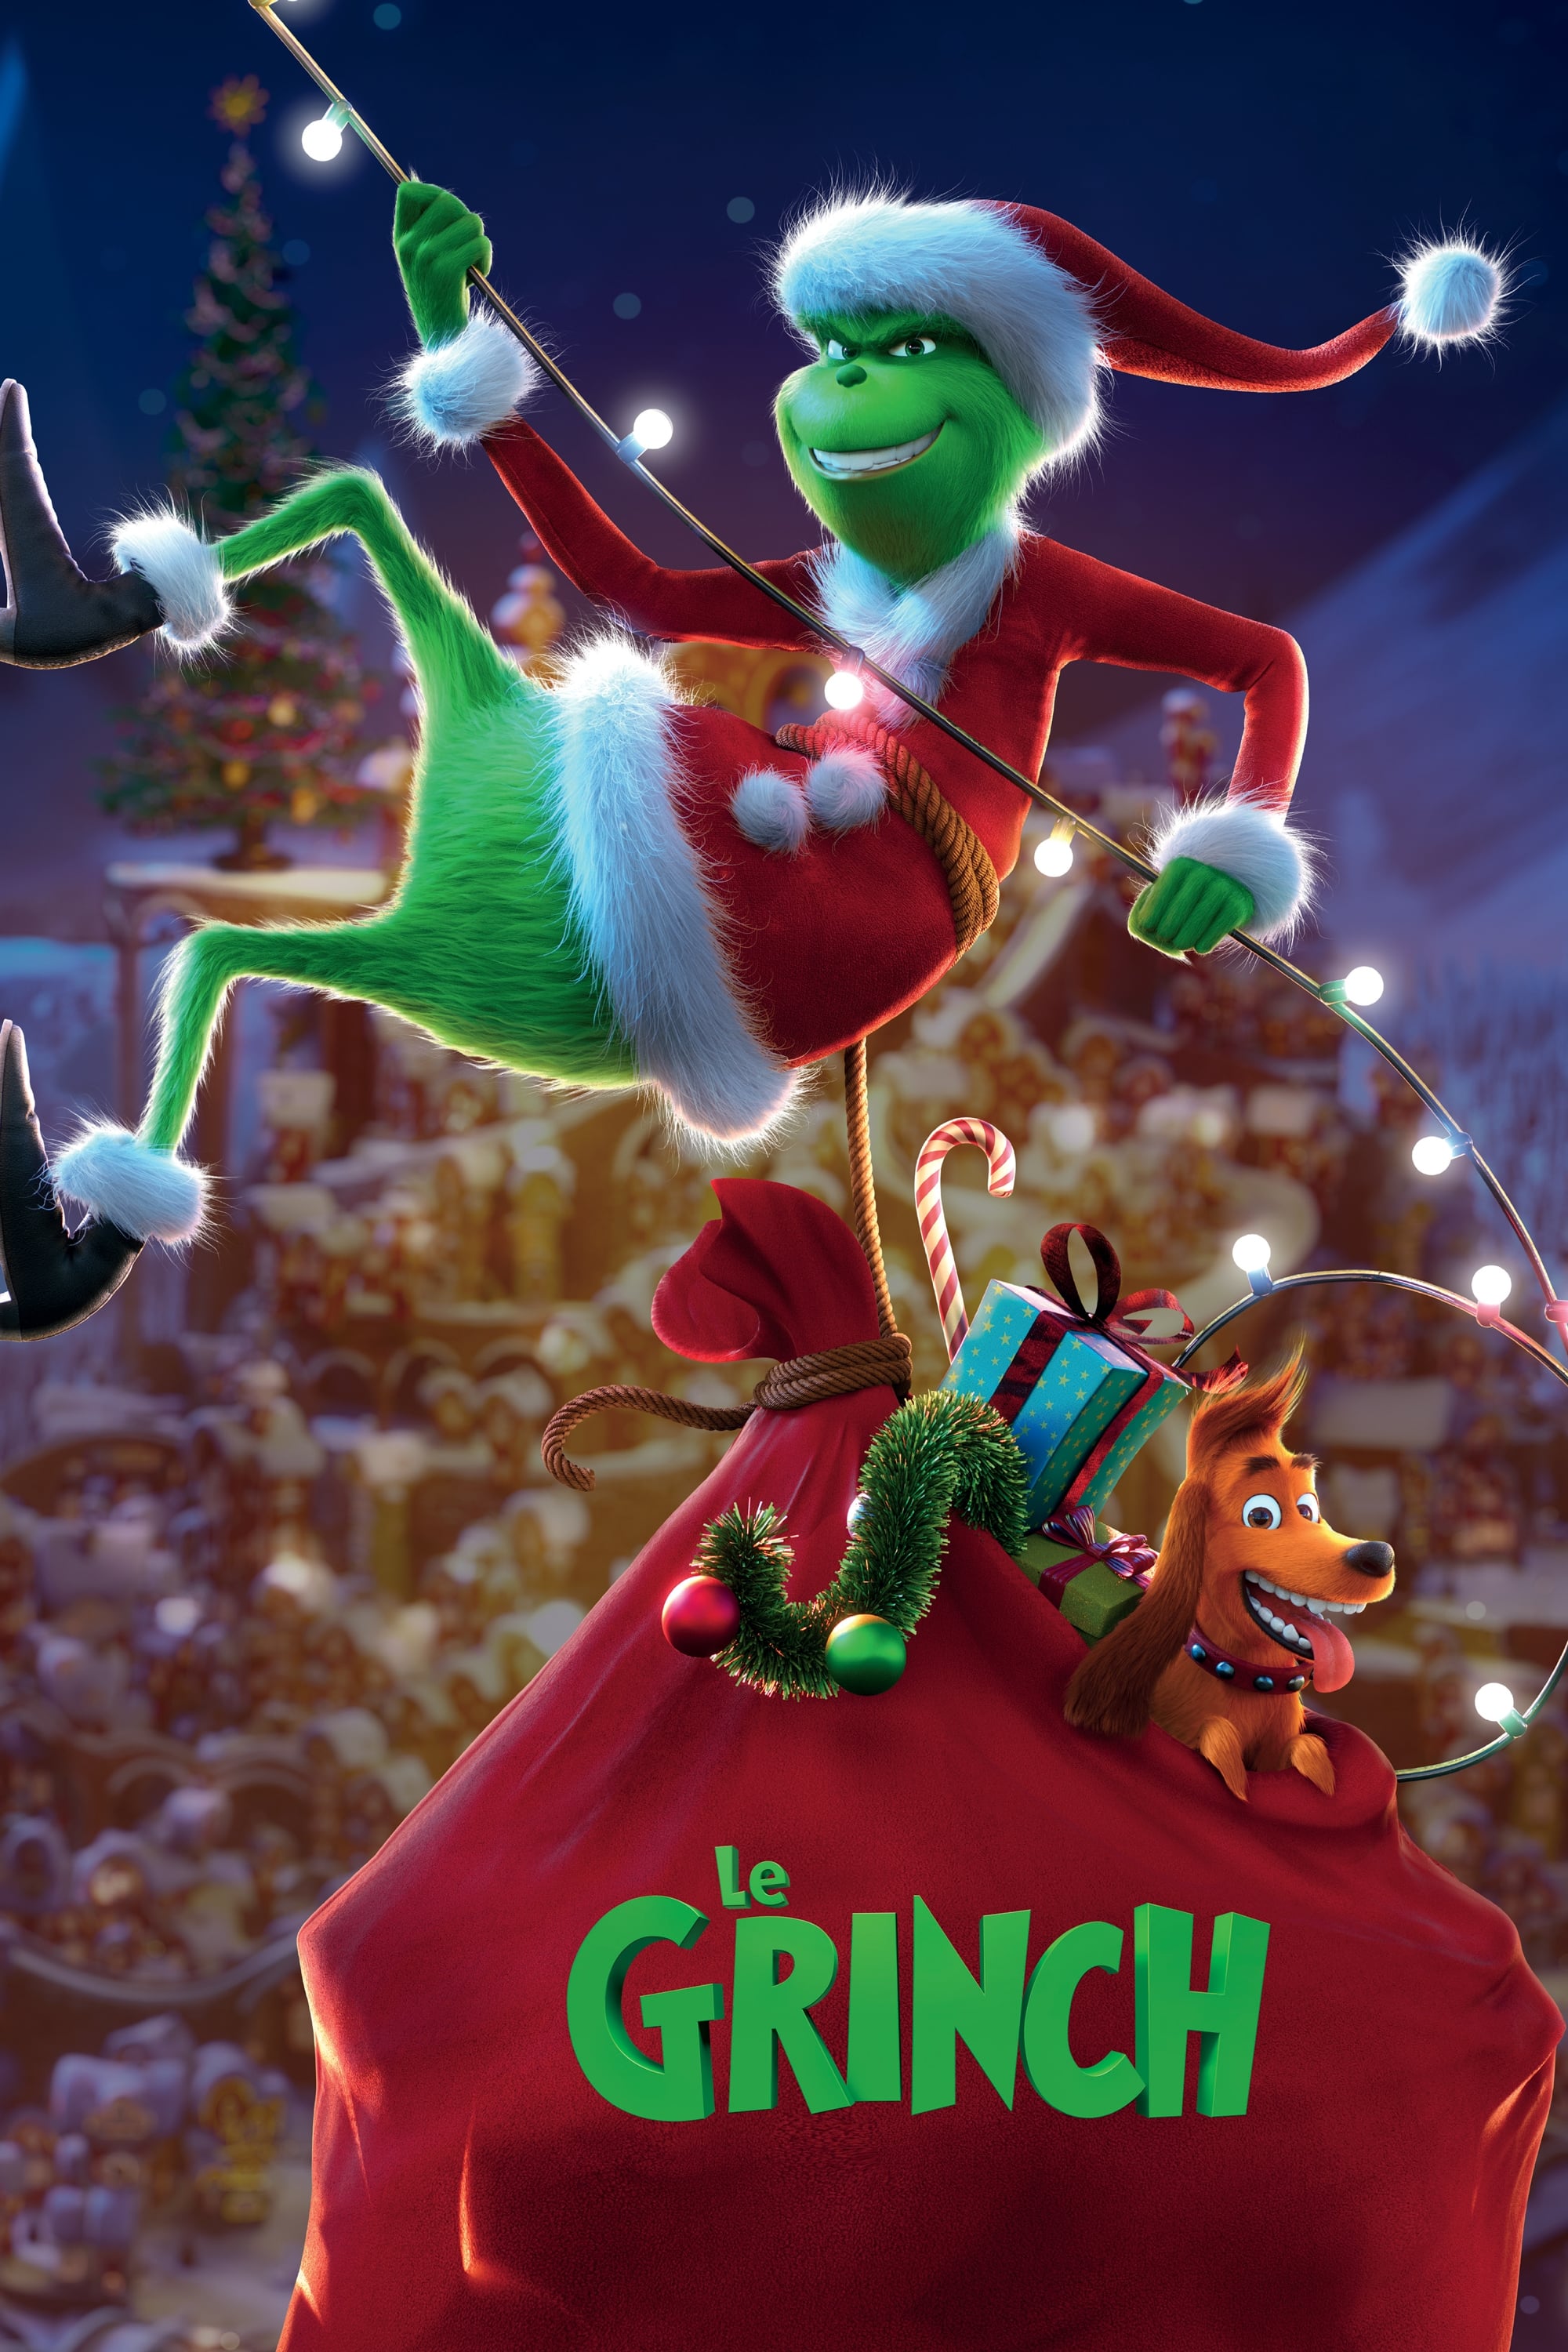 Watch The Grinch (2018) Full Movie Online Free - CineFOX - What Can I Watch The Grinch On For Free